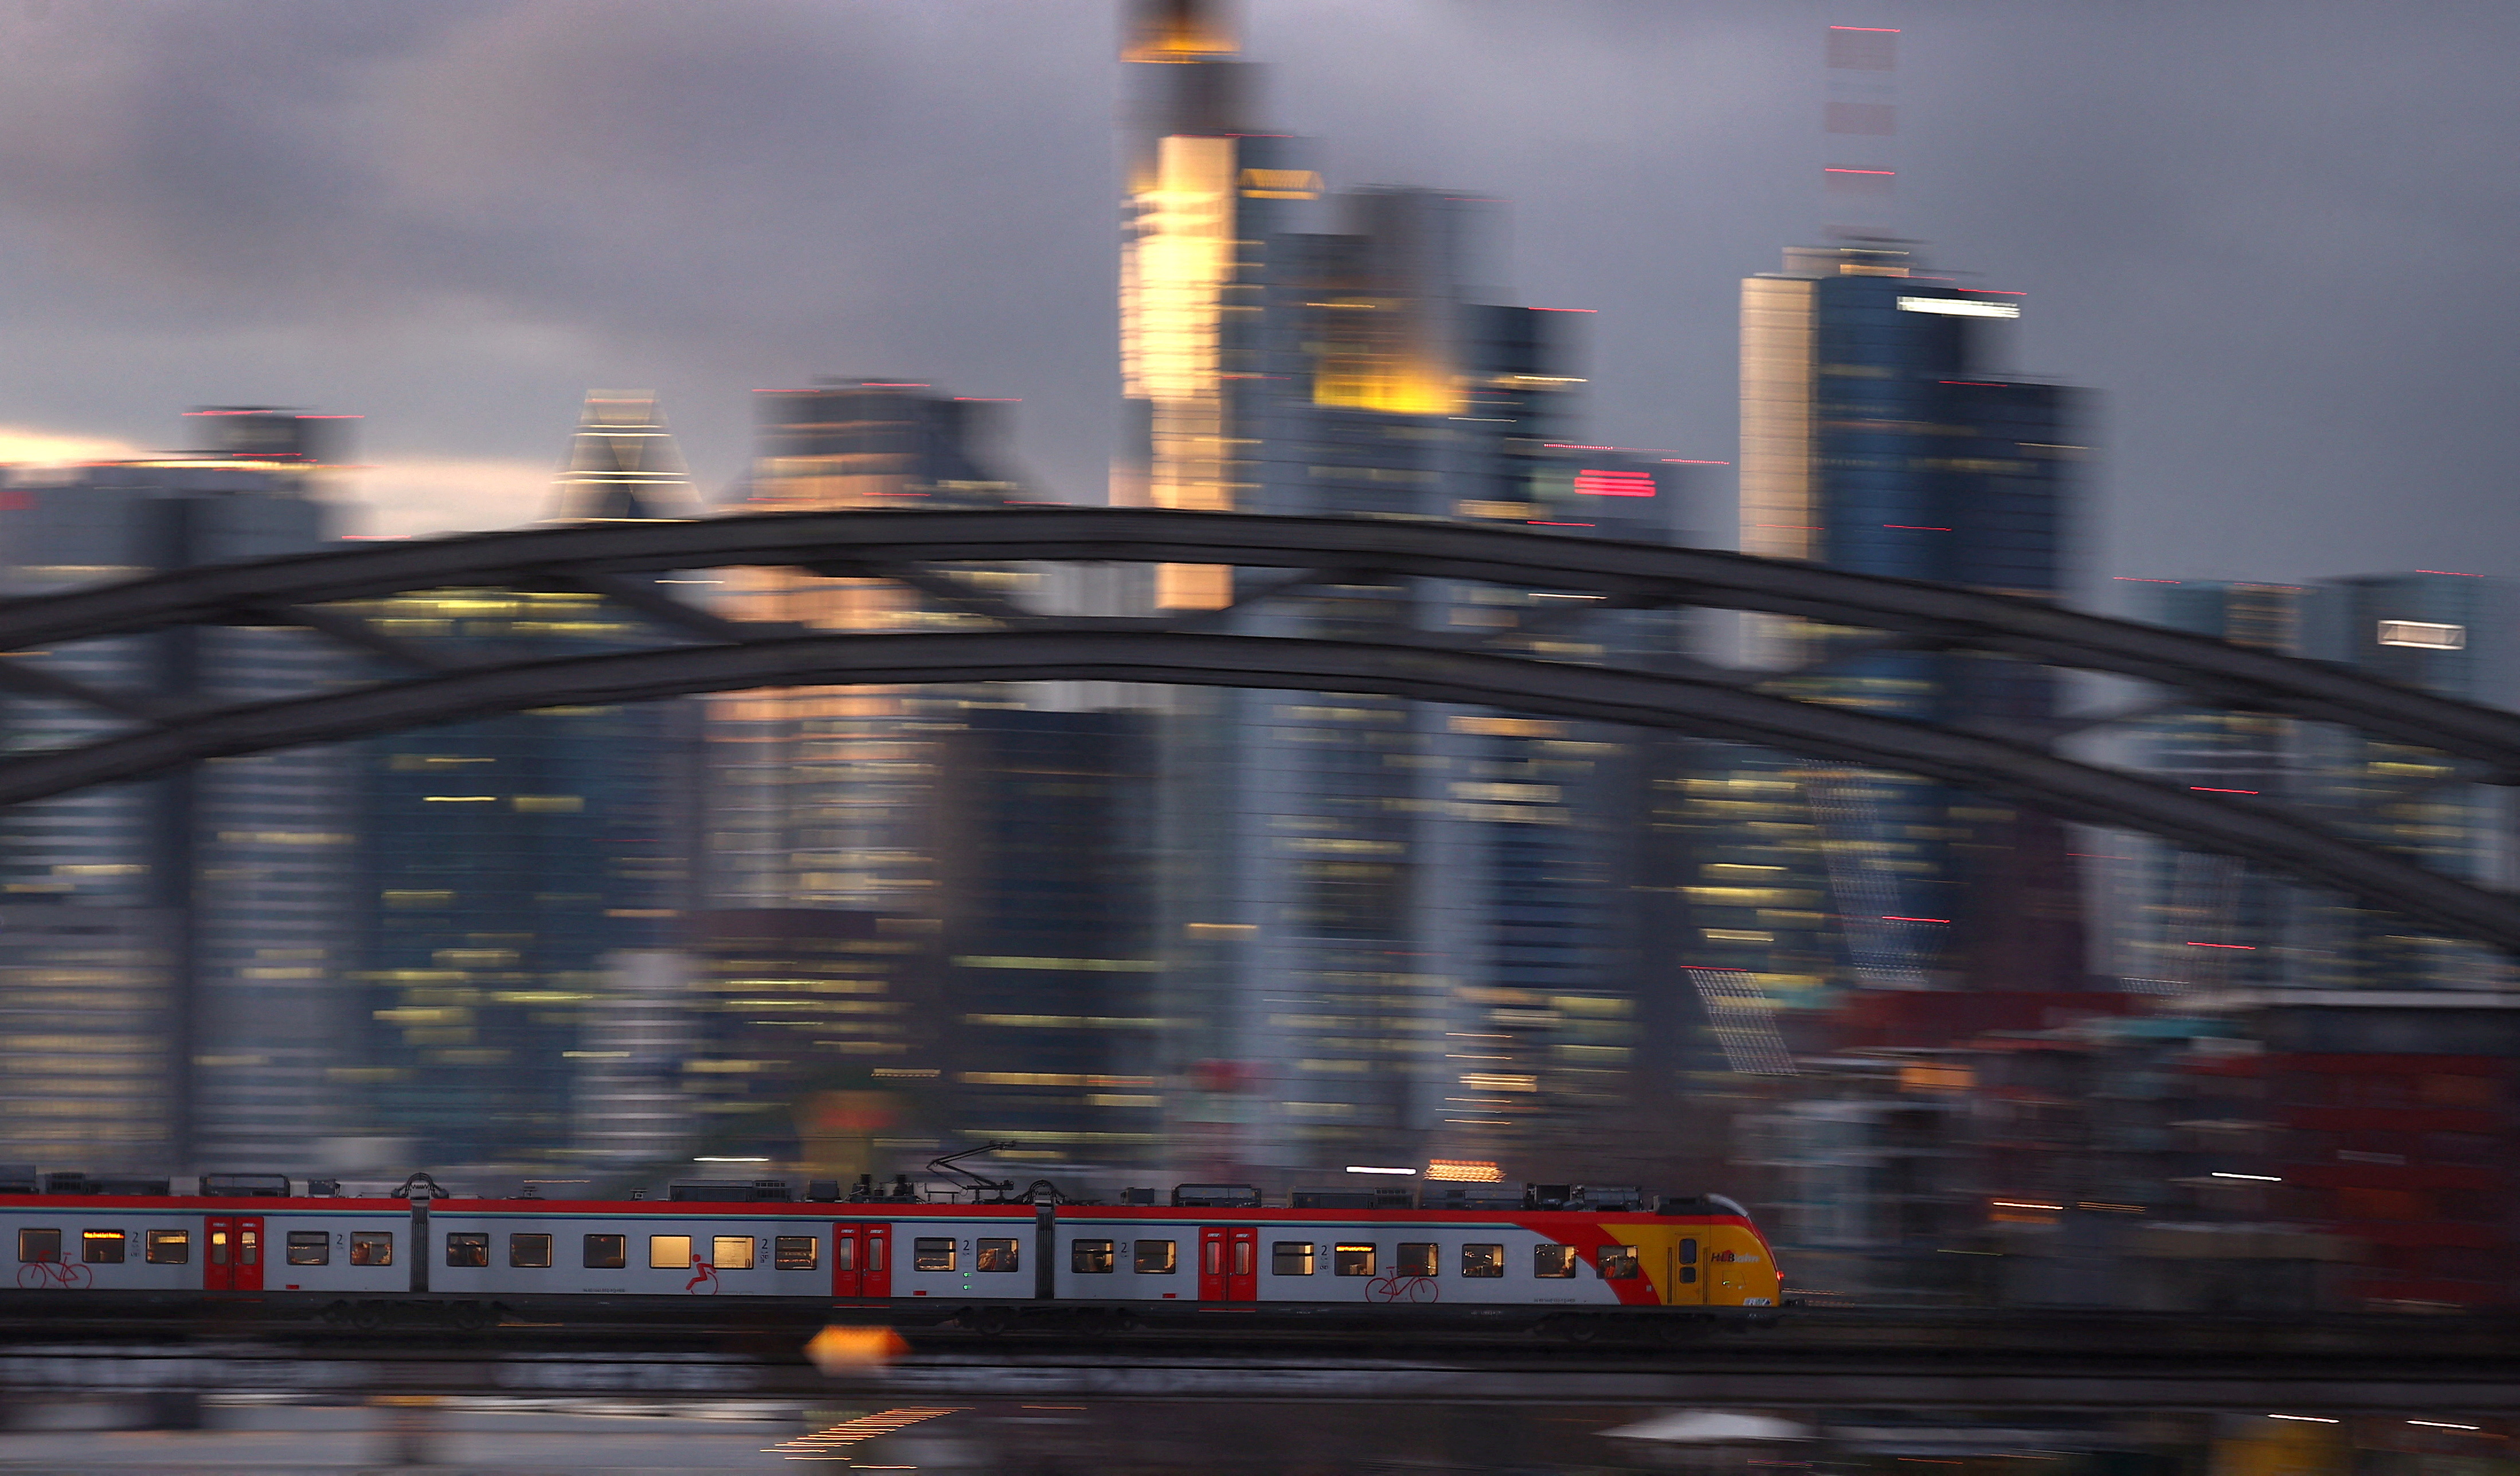 A commuter train passes the skyline in a slow shutter speed photograph in Frankfurt